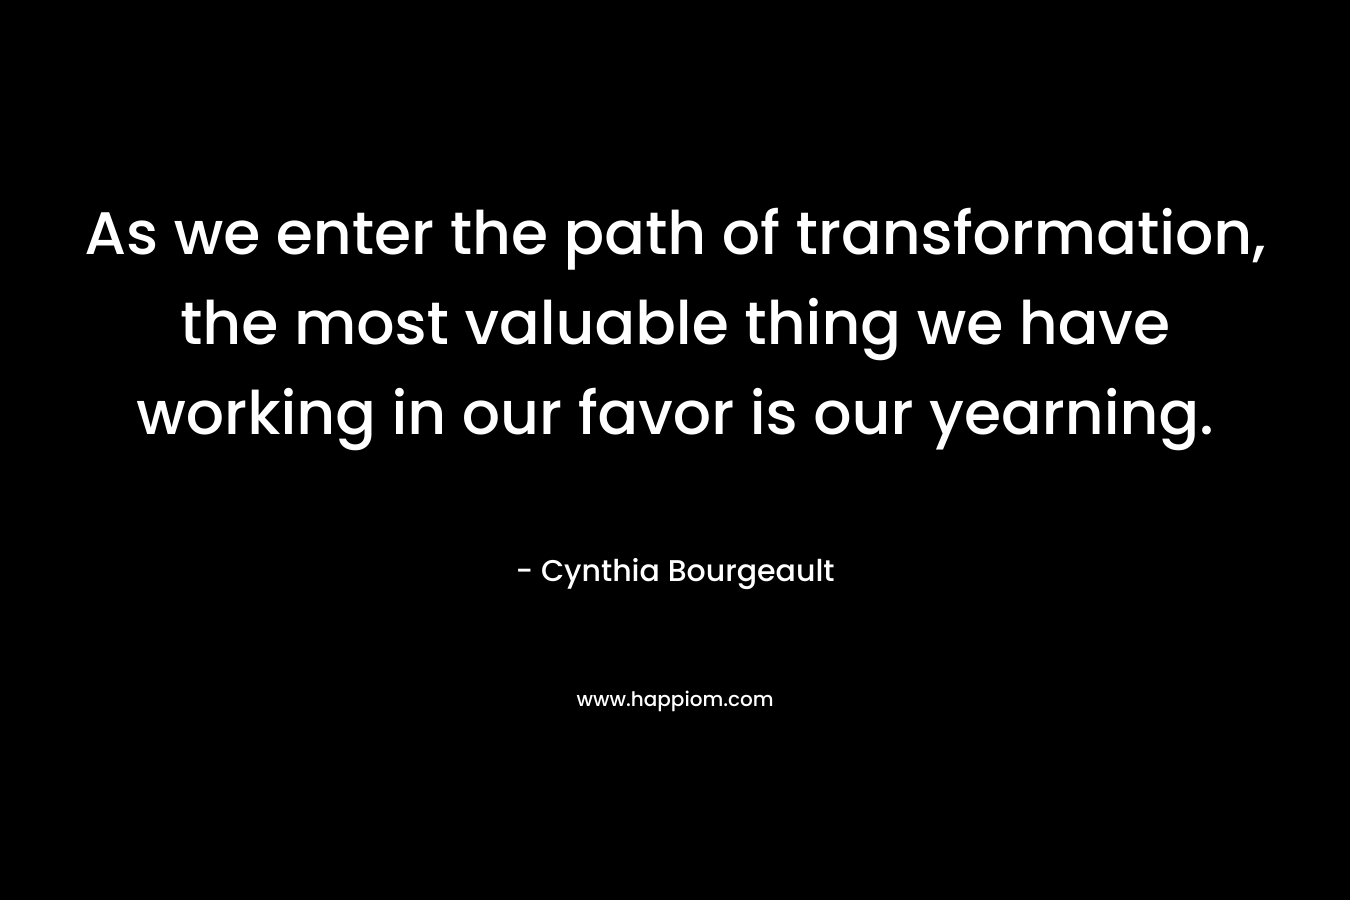 As we enter the path of transformation, the most valuable thing we have working in our favor is our yearning. – Cynthia Bourgeault